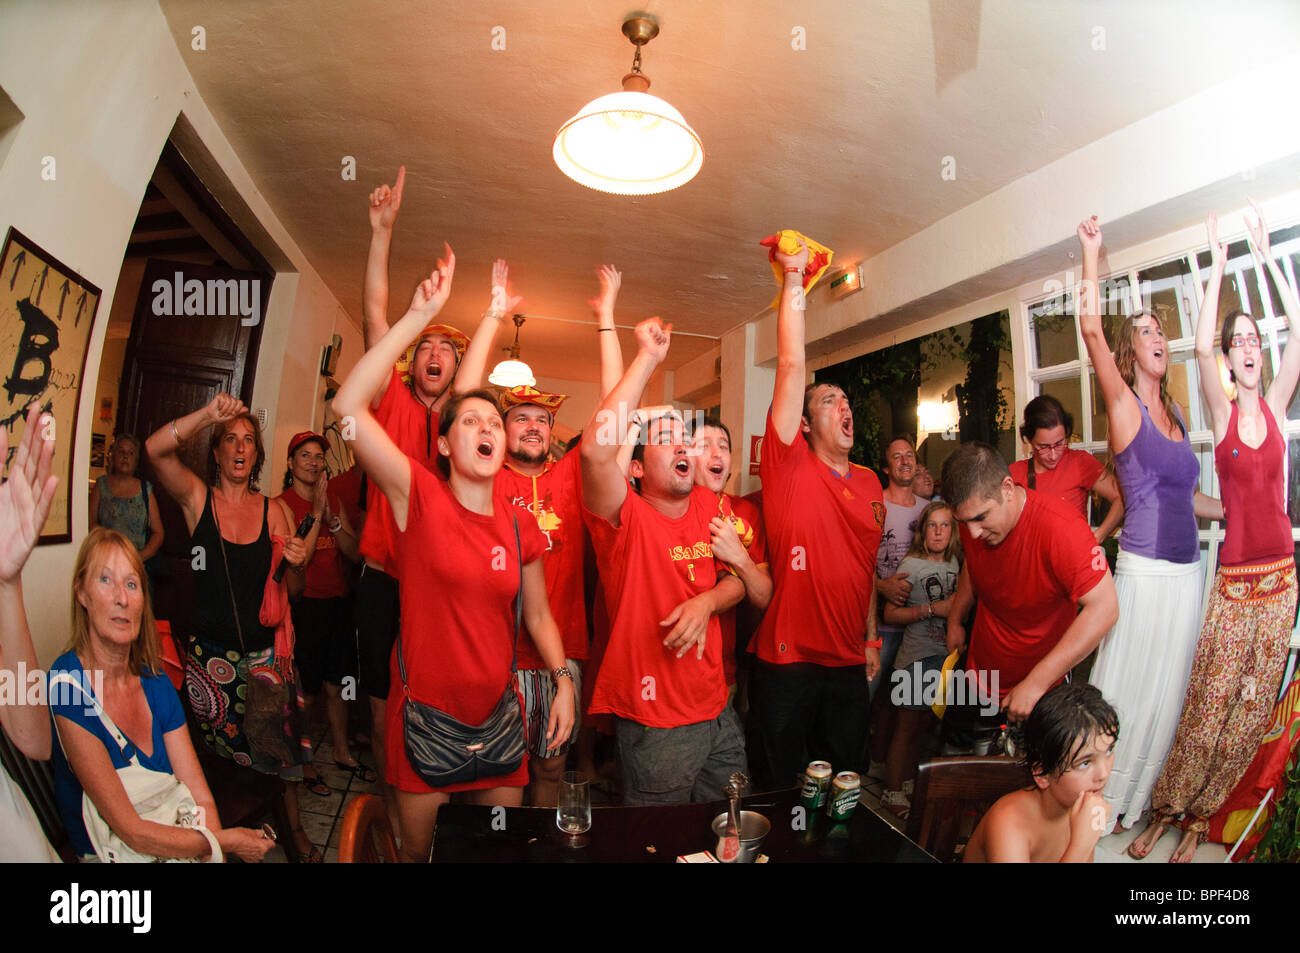 Fans of the spanish national football team celebrate winning the FIFA World Cup 2010 Final in a bar in Altea La Vella, Spain Stock Photo